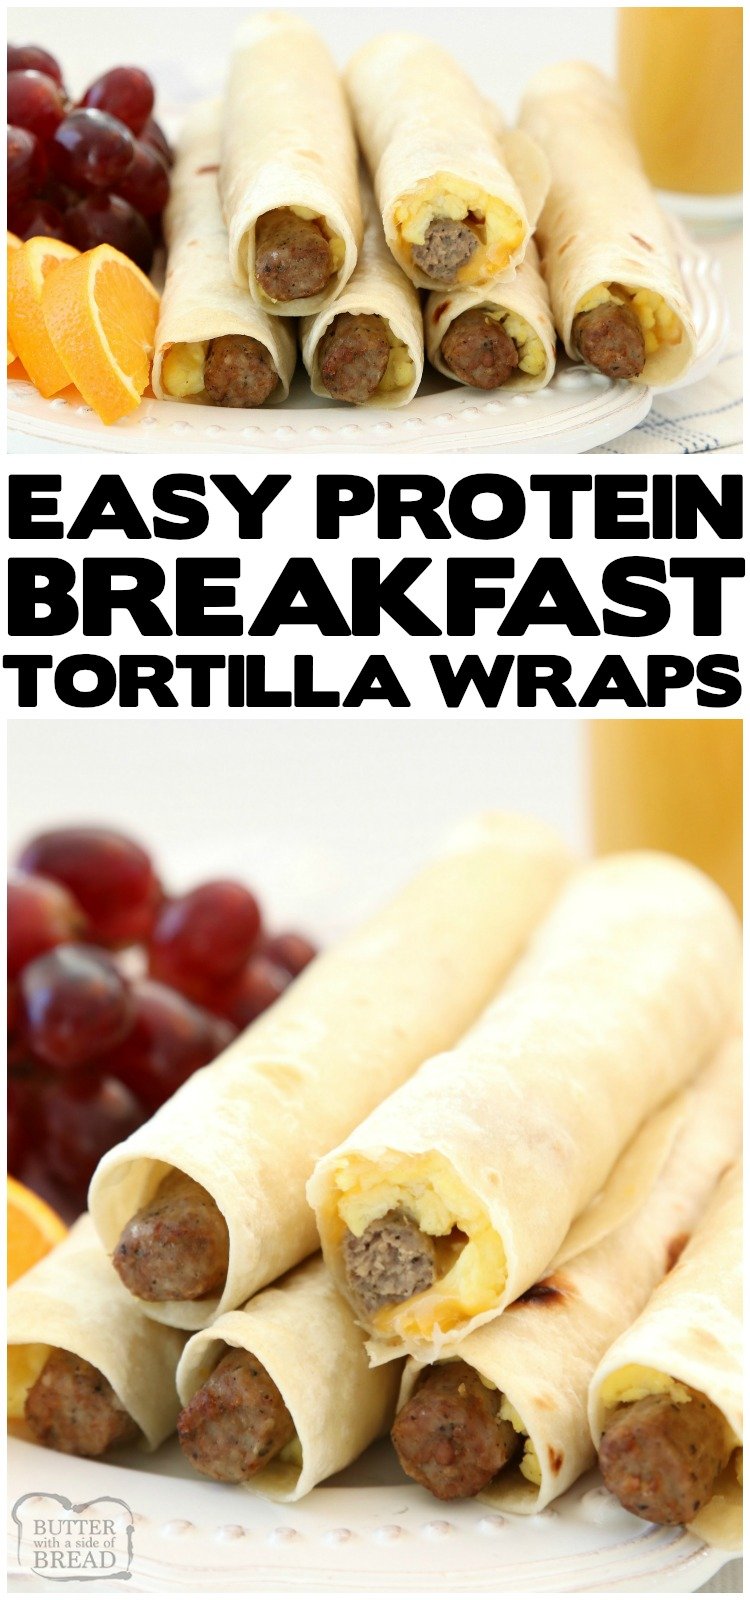 High Protein Breakfast Wraps made with turkey sausage, eggs and cheese wrapped in a fresh tortilla. Easy on the go breakfast that's delicious and & satisfying for everyone! #breakfast #protein #highprotein #eggs #sausage #cheese #food #cooking #freezer #recipe from BUTTER WITH A SIDE OF BREAD